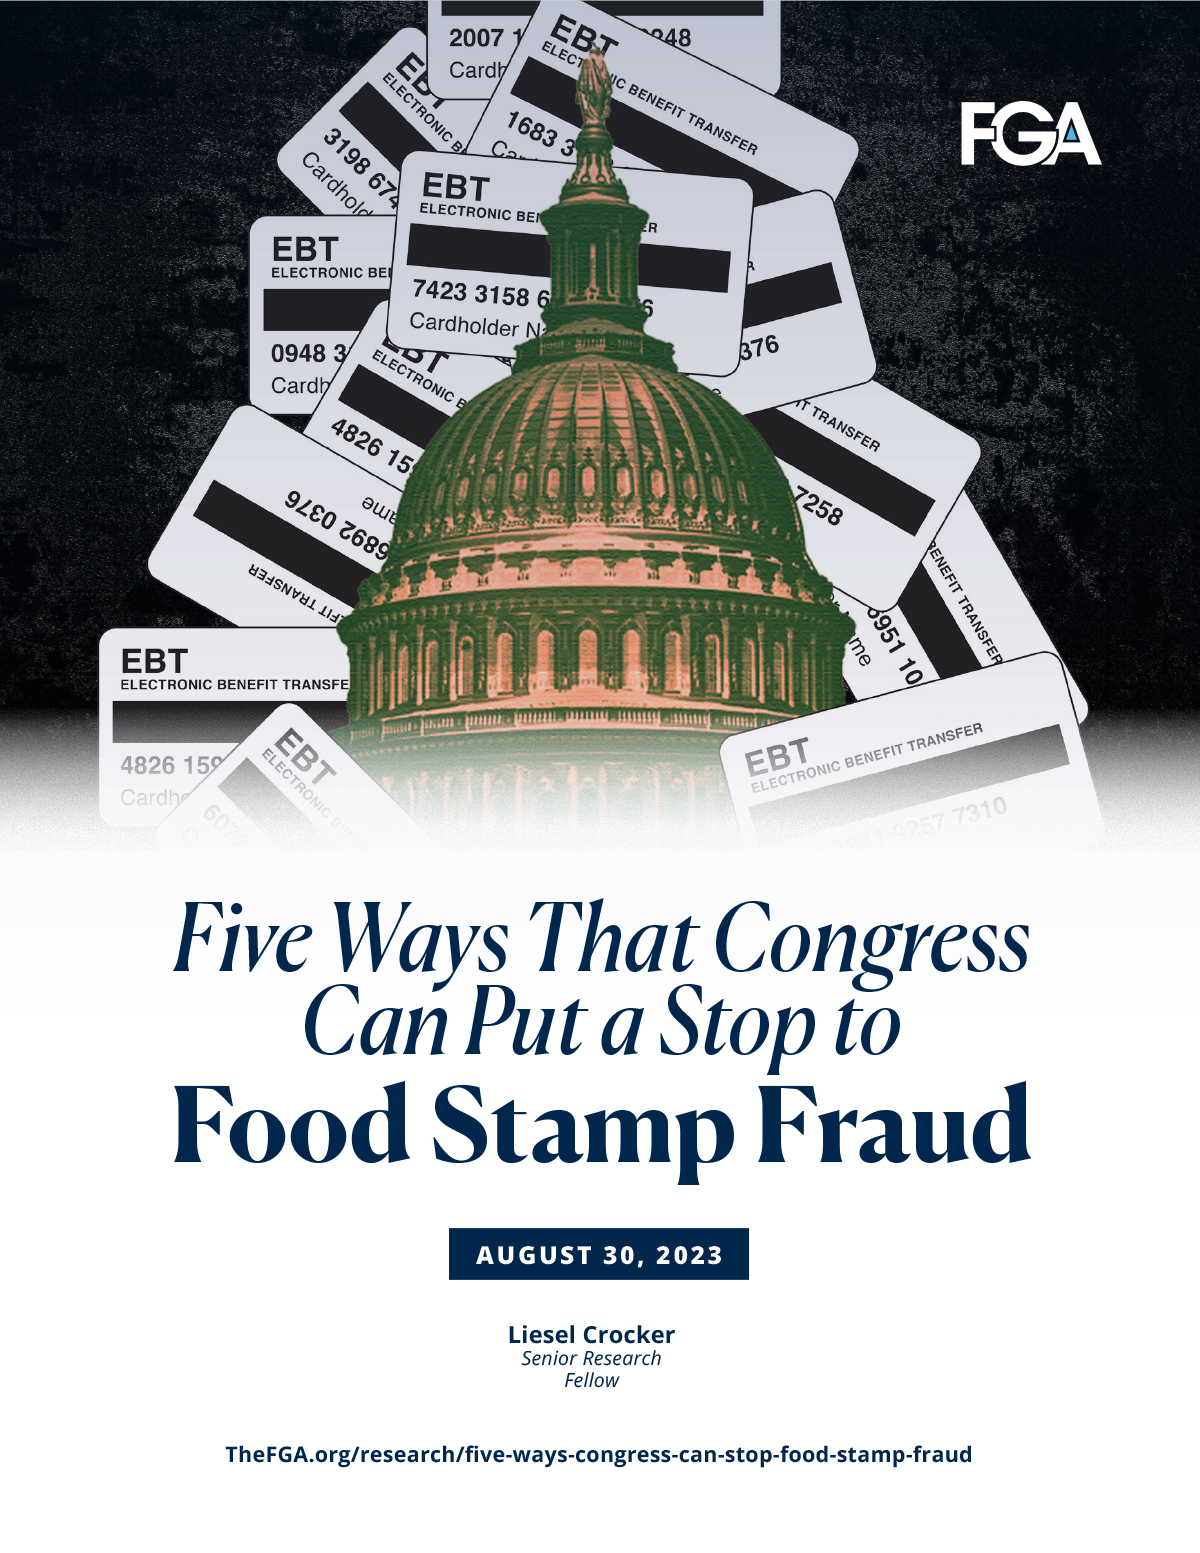 Five Ways That Congress Can Put a Stop to Food Stamp Fraud